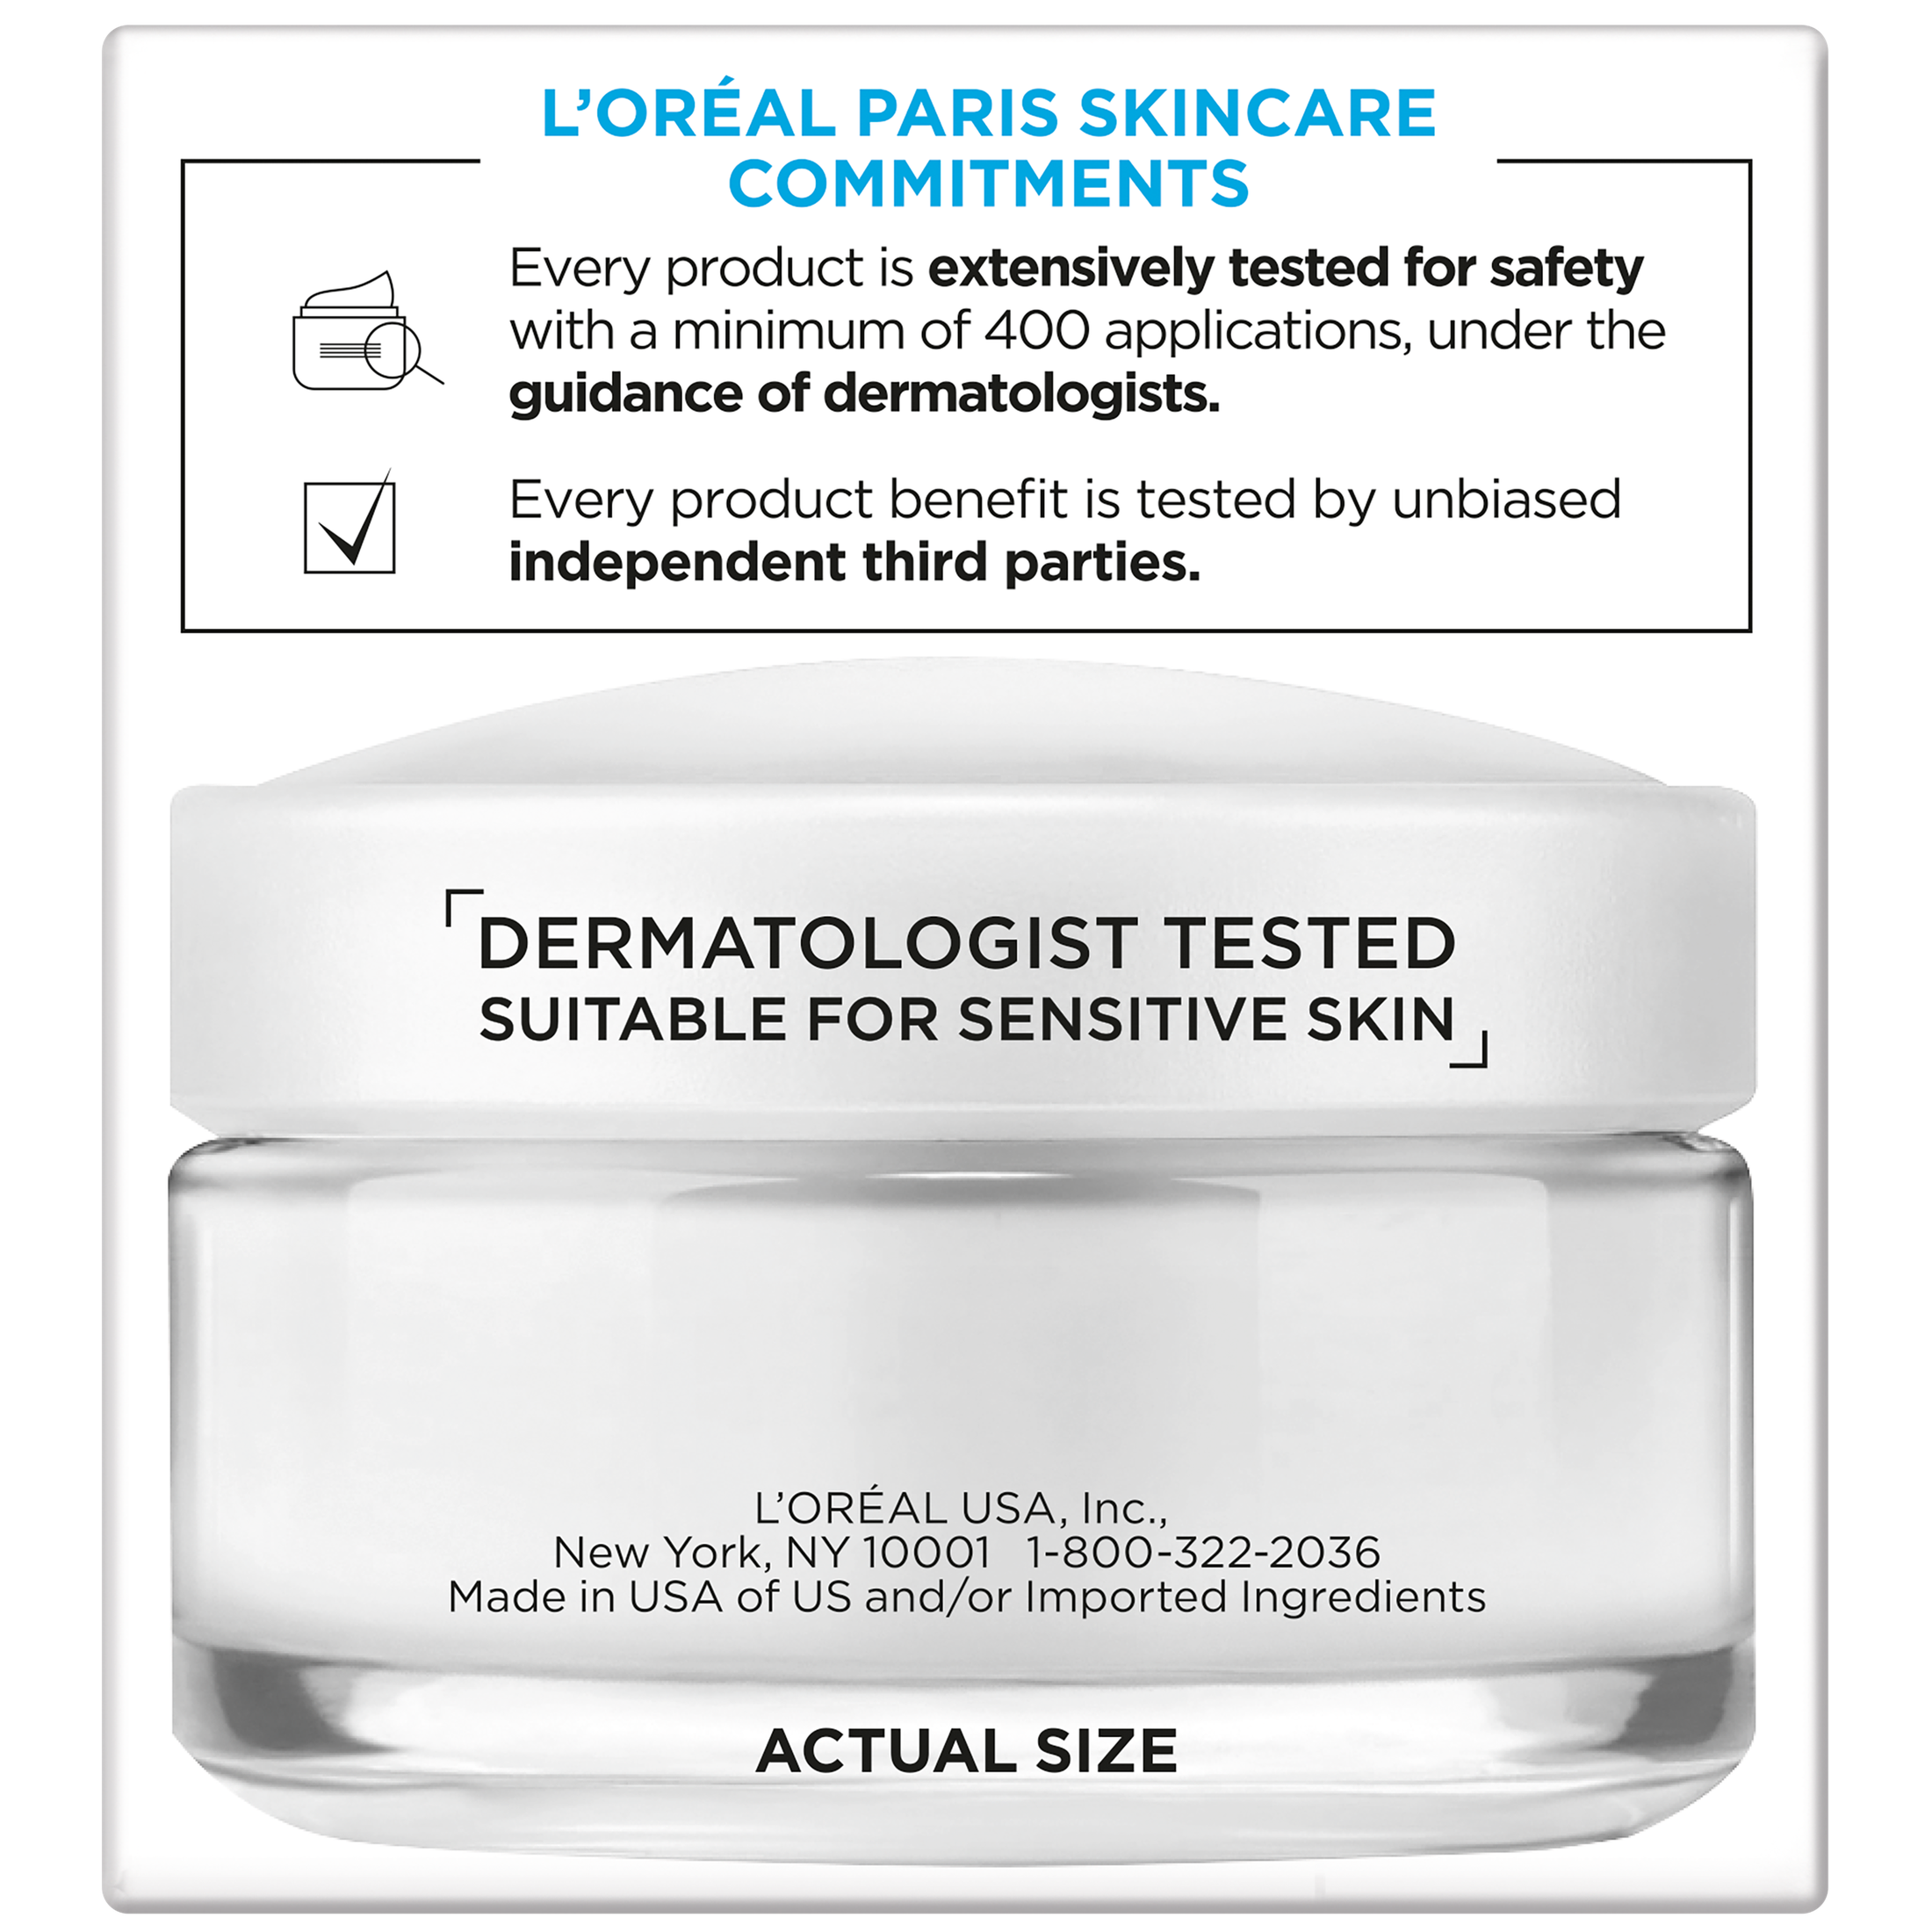 L'Oreal Paris Wrinkle Expert 35+ Day and Night Moisturizer, 1.7 oz - image 5 of 5